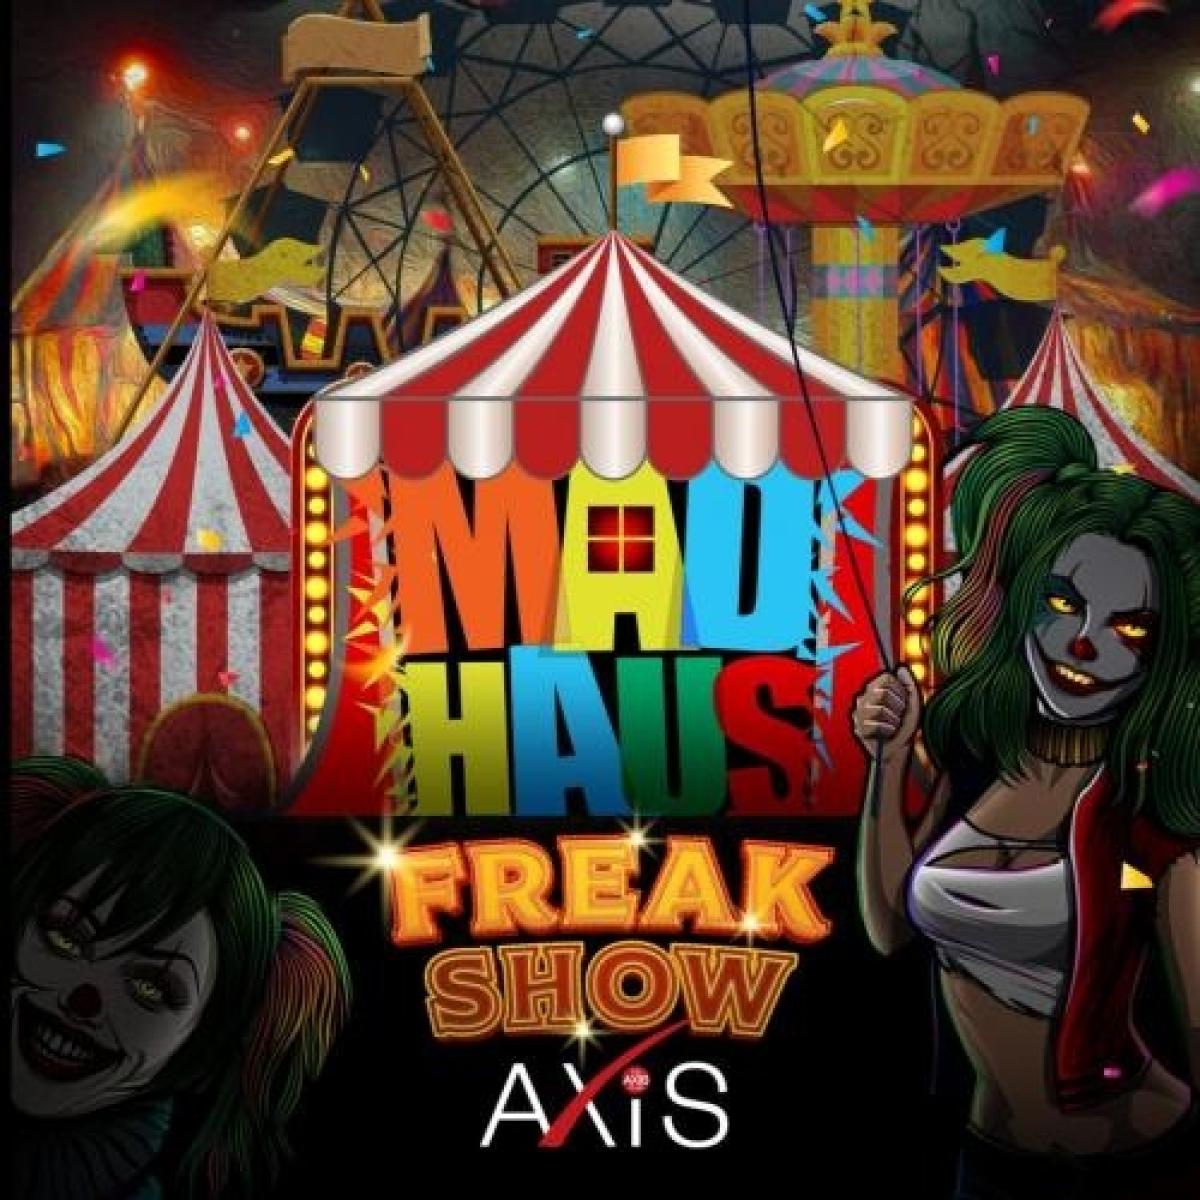 Mad Haus - Freak Show flyer or graphic.